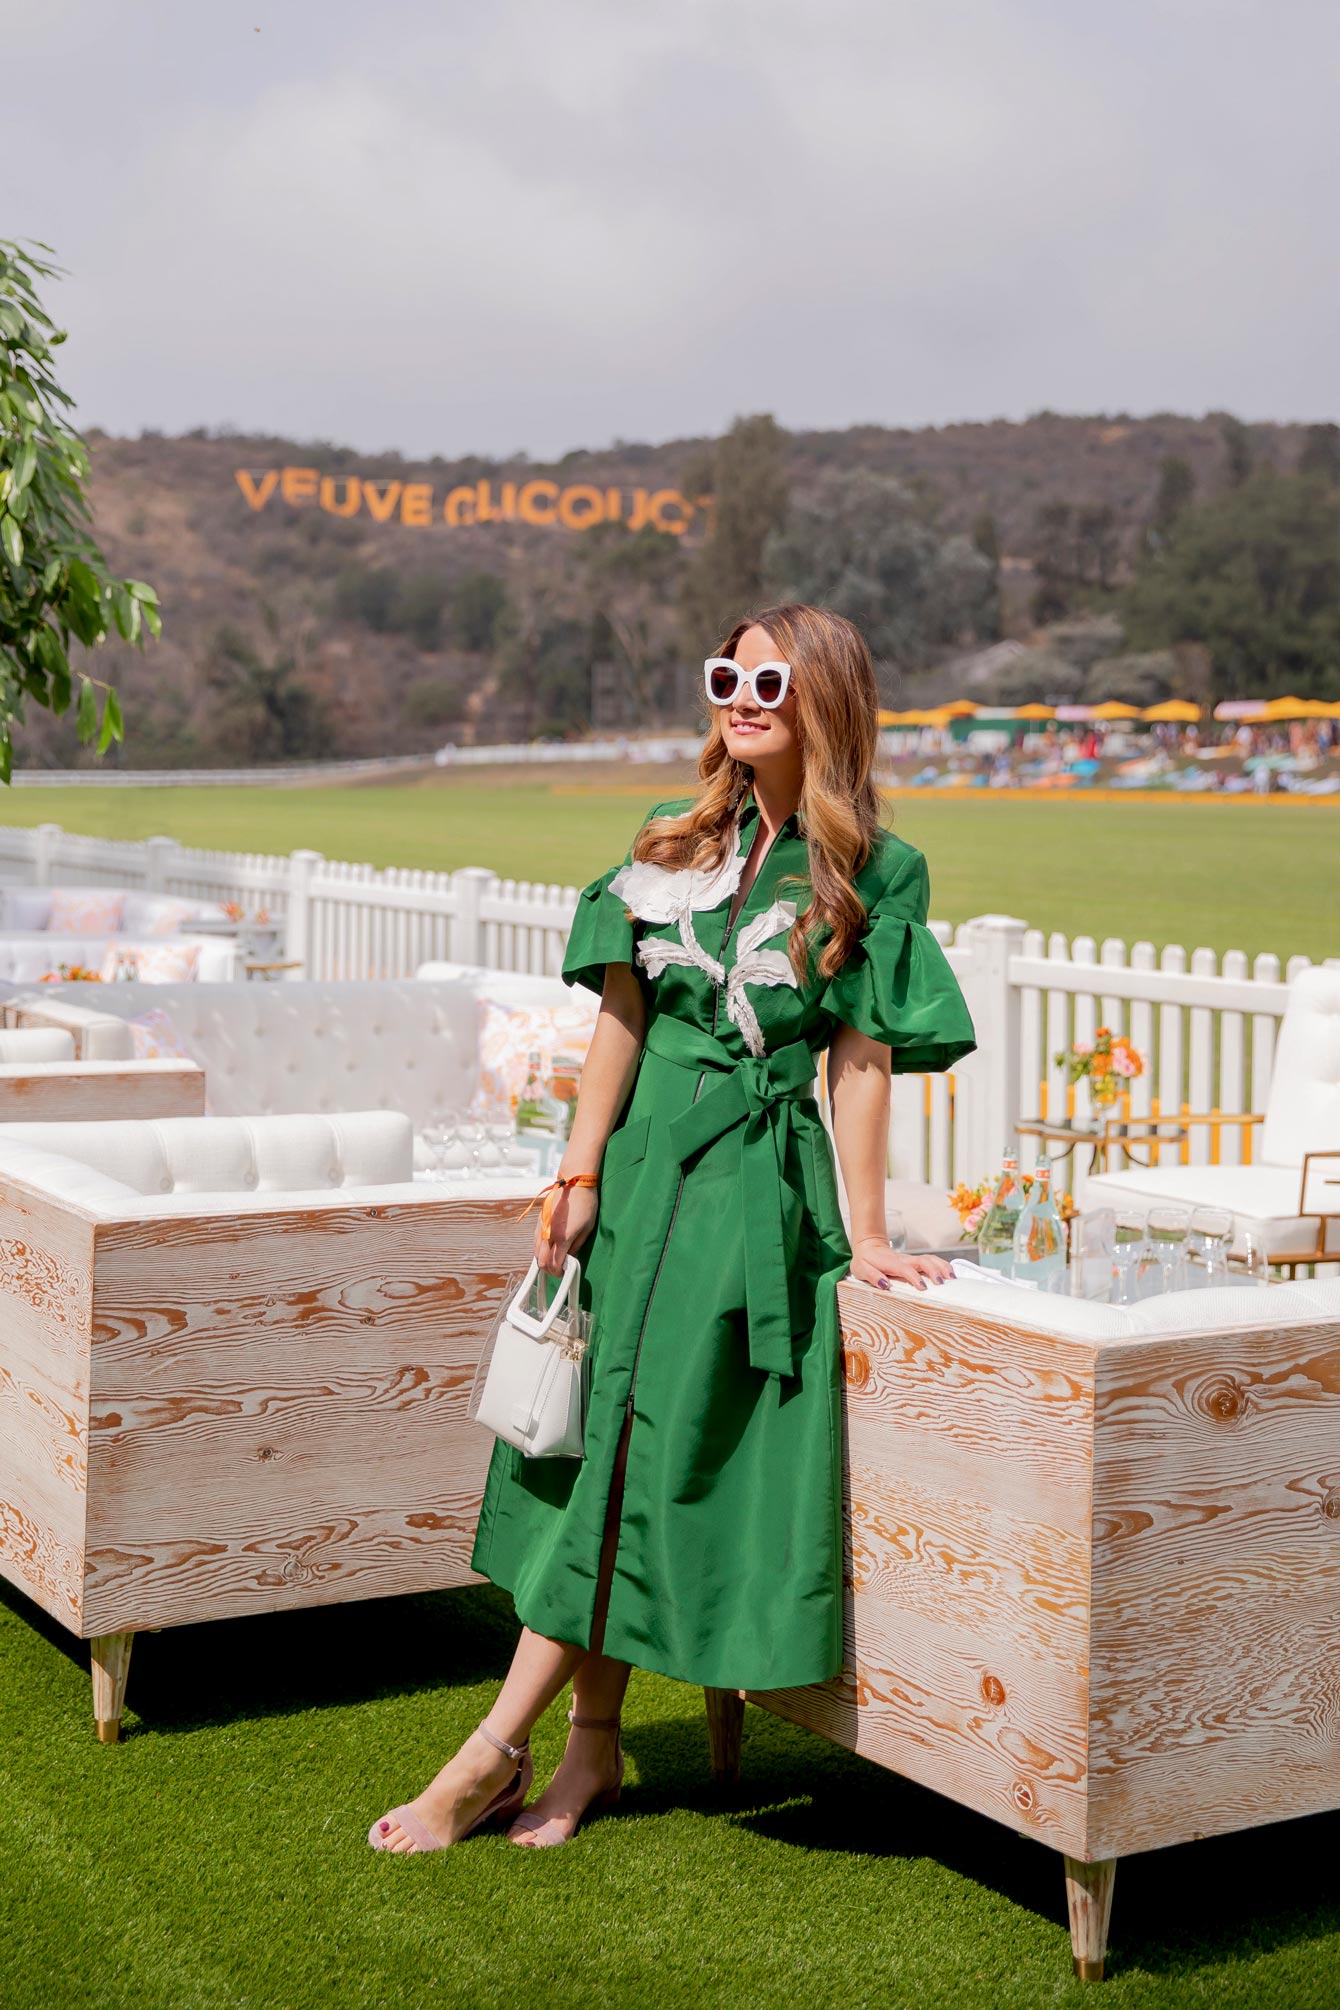 NYC VLOG: 2023 Veuve Clicquot Polo Classic + Block Party on Bed